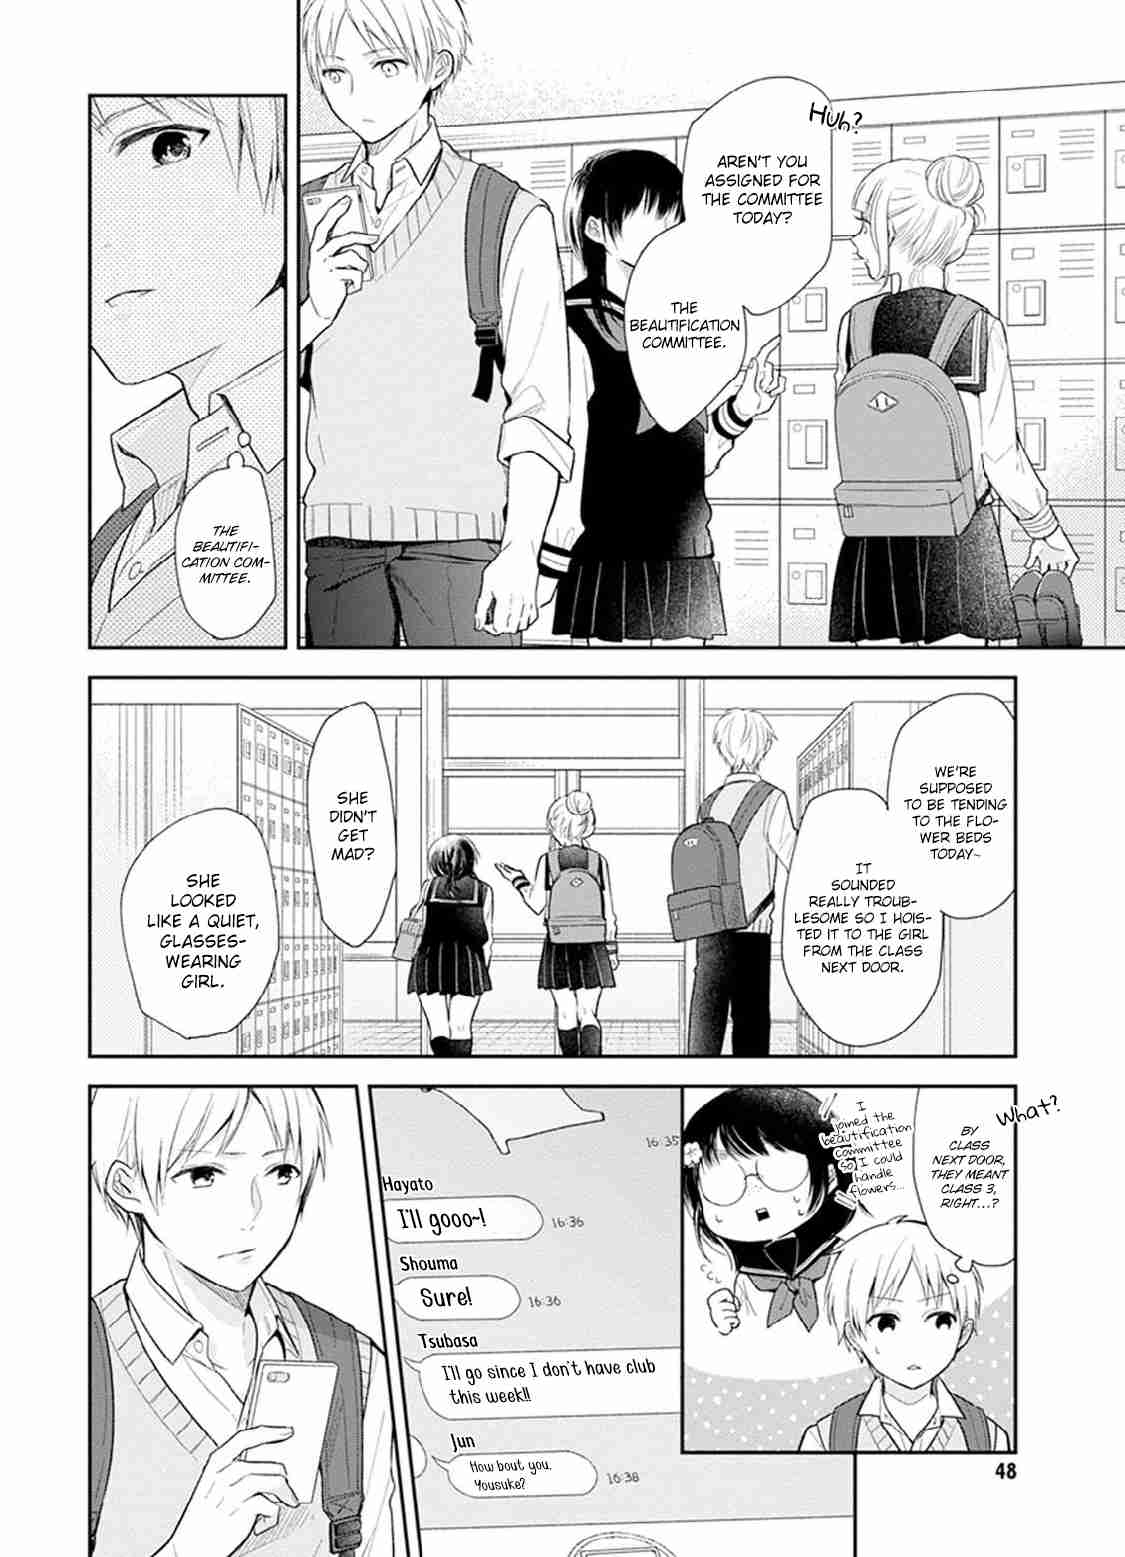 A Bouquet For An Ugly Girl. Vol. 1 Ch. 2 A Way To Measure The Distance With An Honest Person